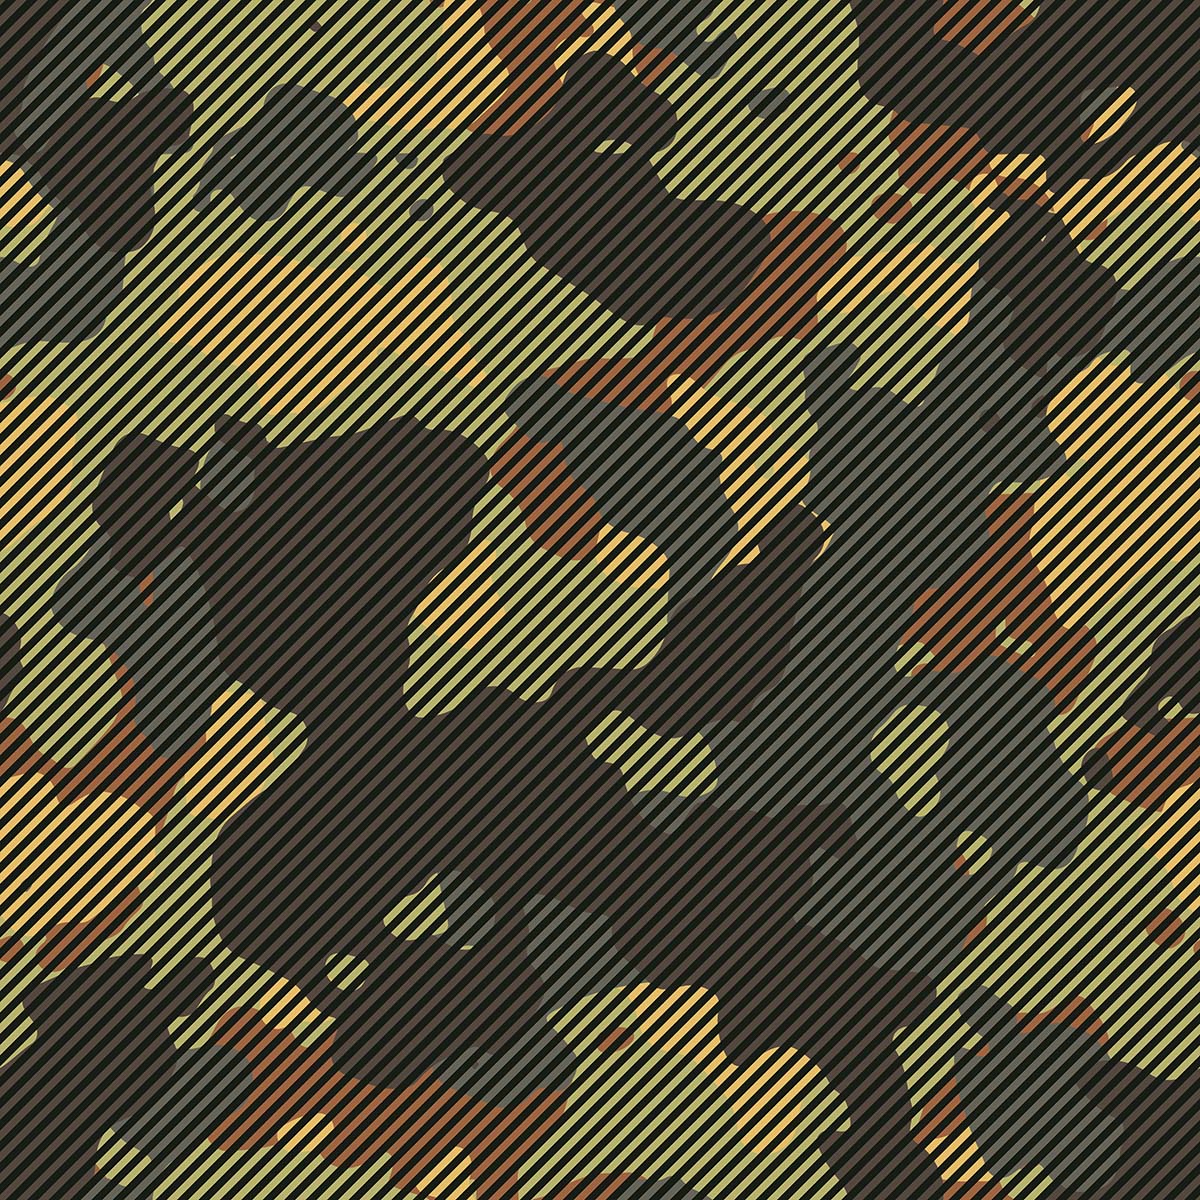 A camouflage pattern with black and yellow stripes